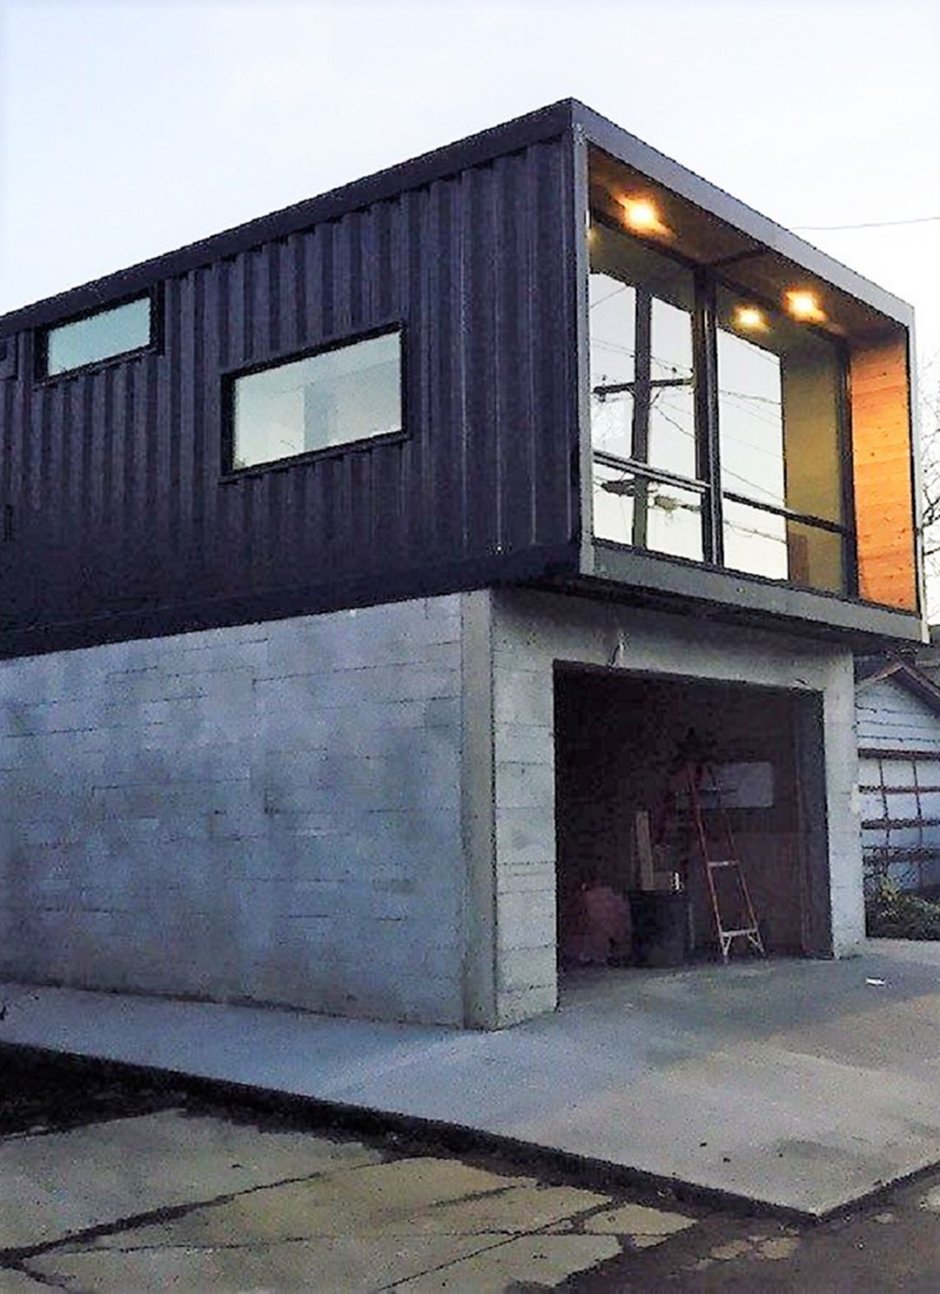 Honomobo shipping Container Homes